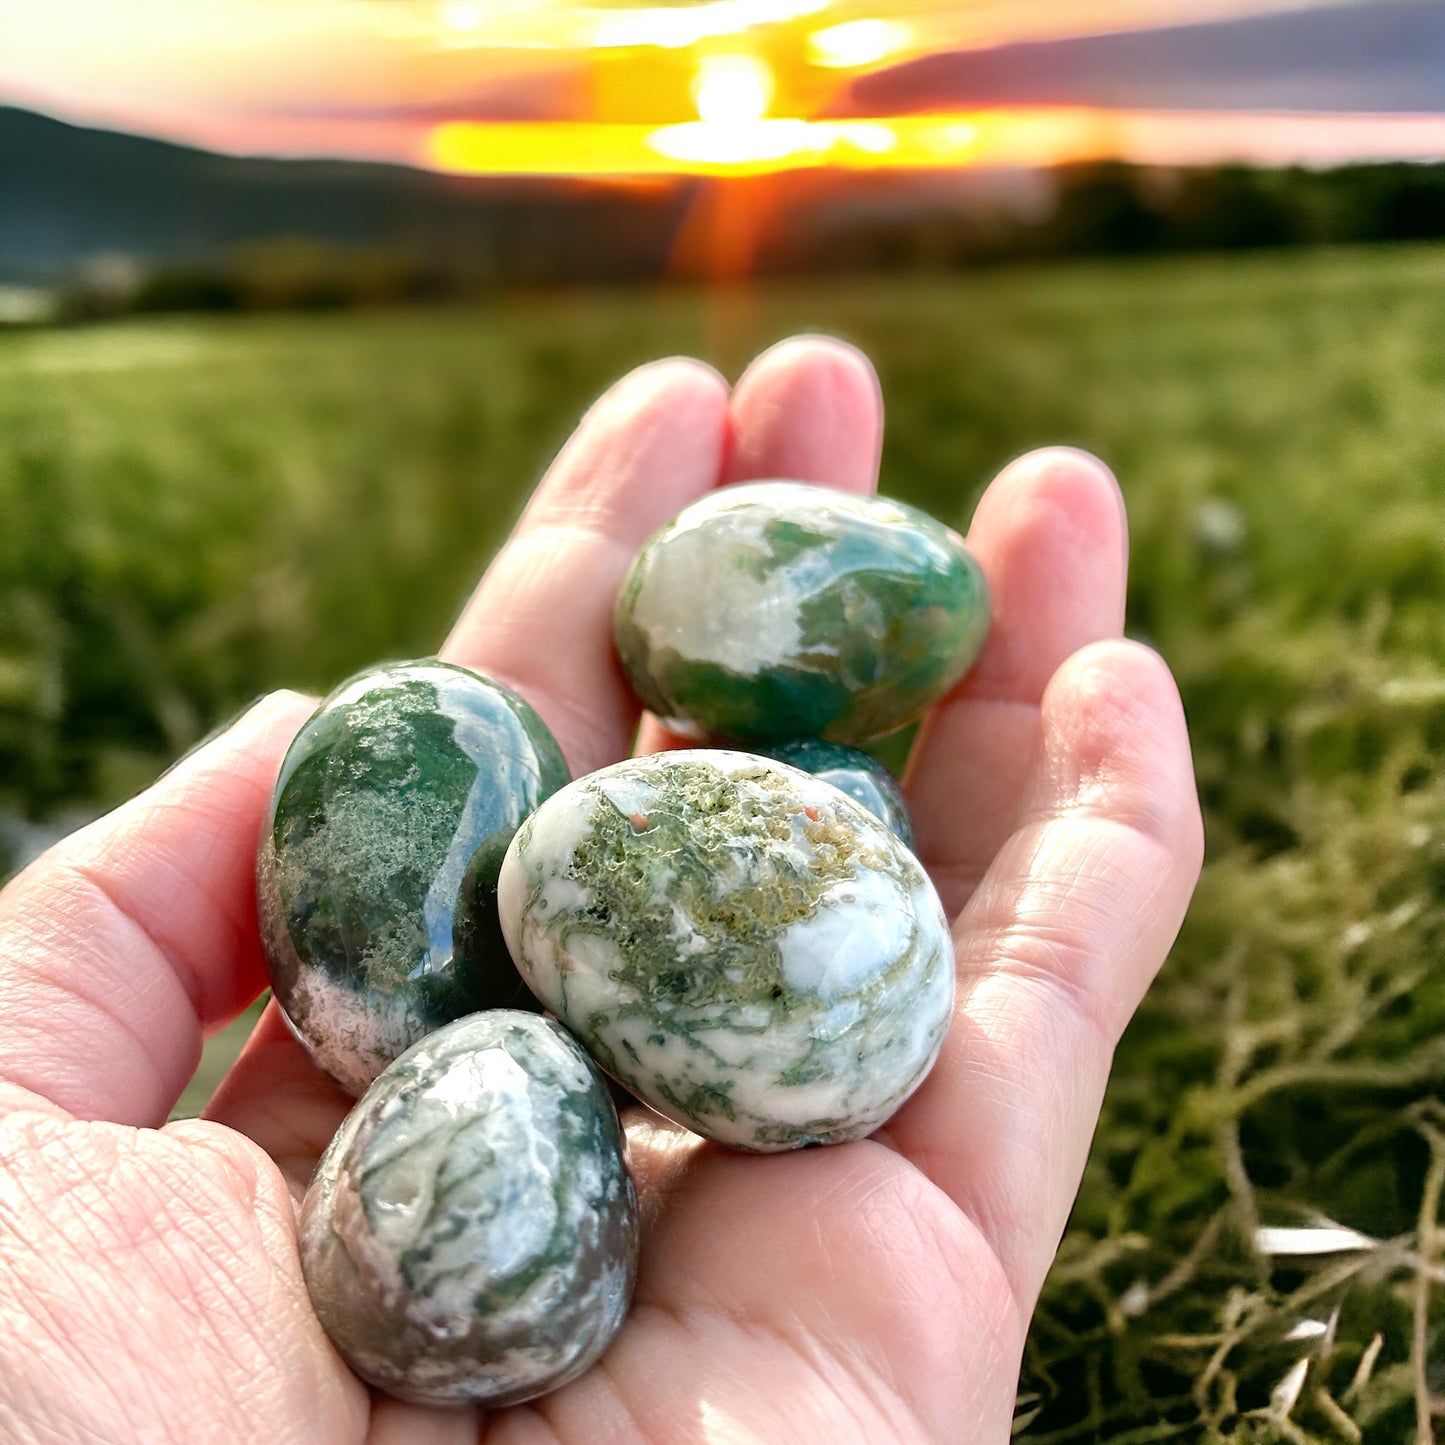 Moss Agate Tumbled Pebbles (30mm) Per Piece (Money Grows)